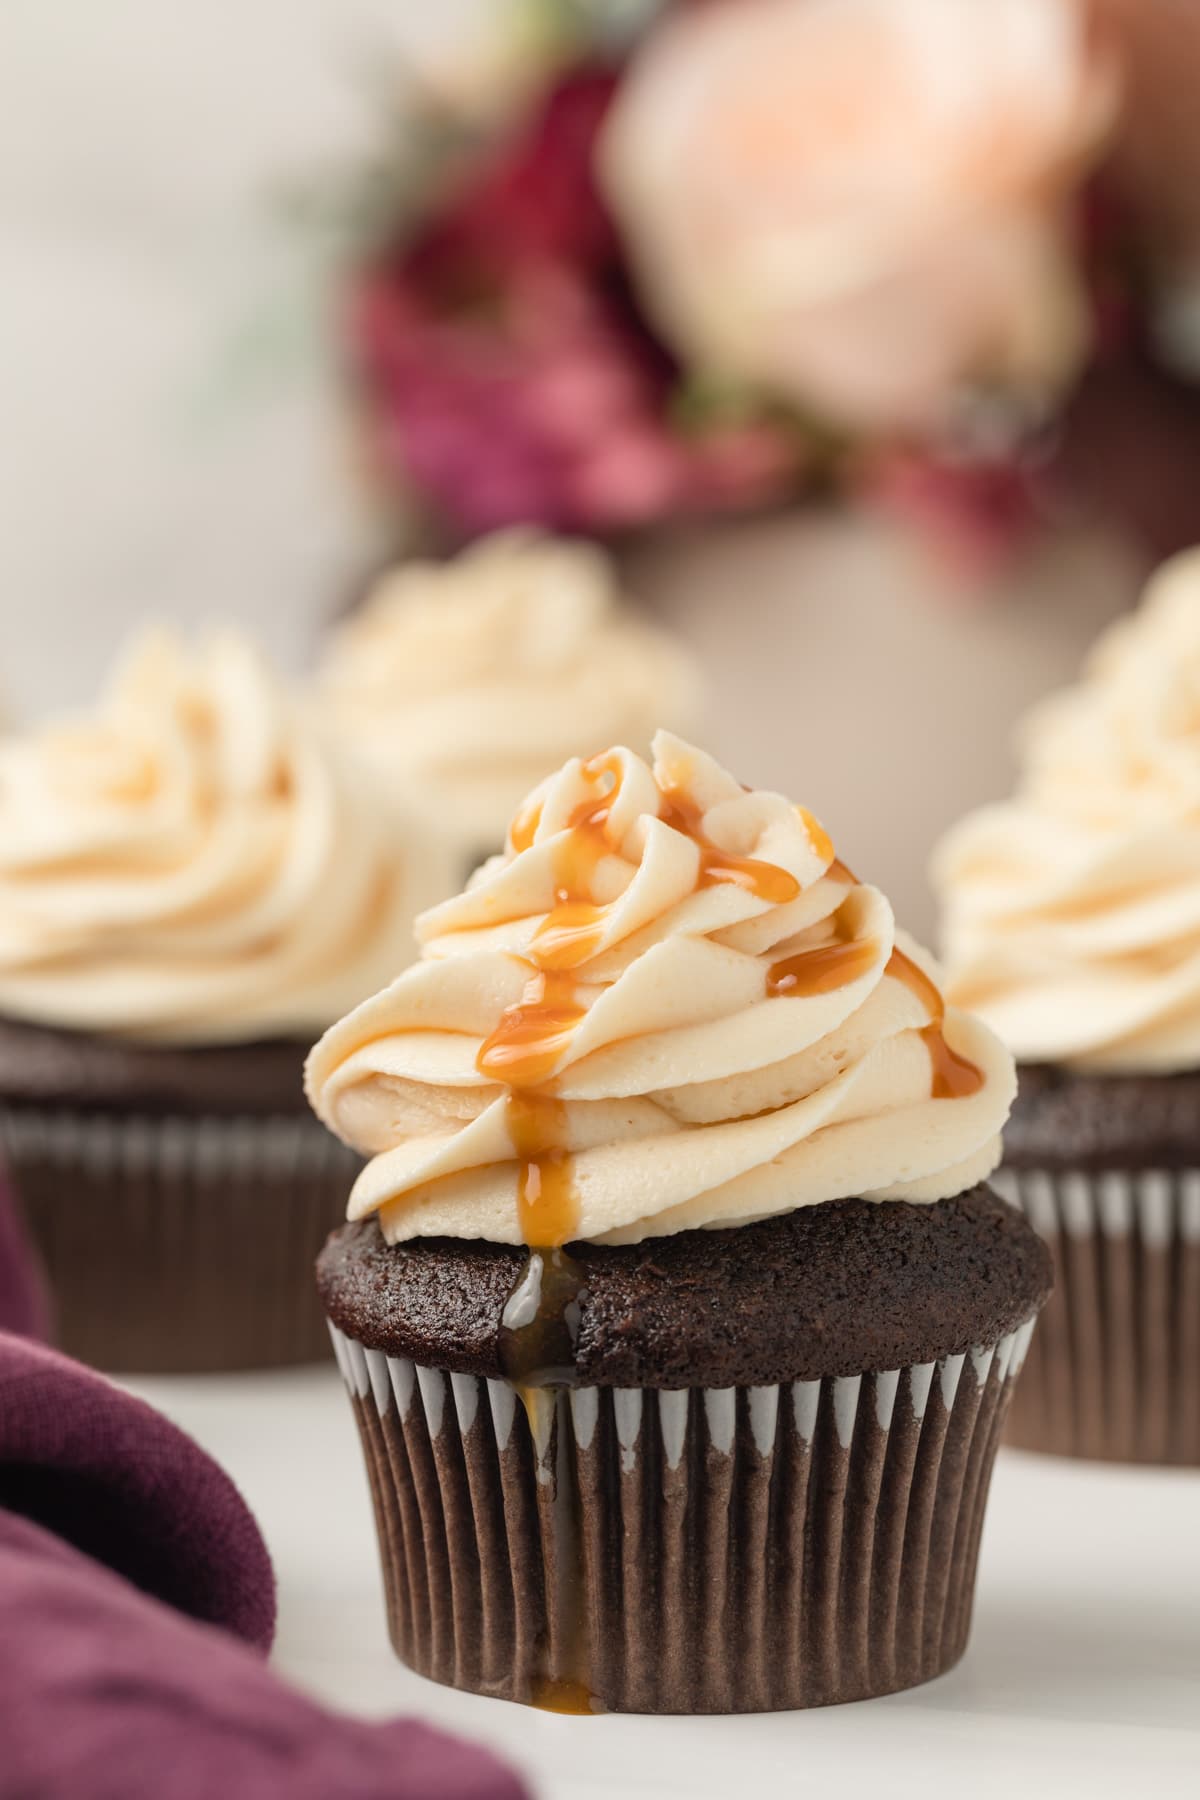 salted caramel frosting swirled on top of a chocolate cupcake with a drizzle of caramel sauce